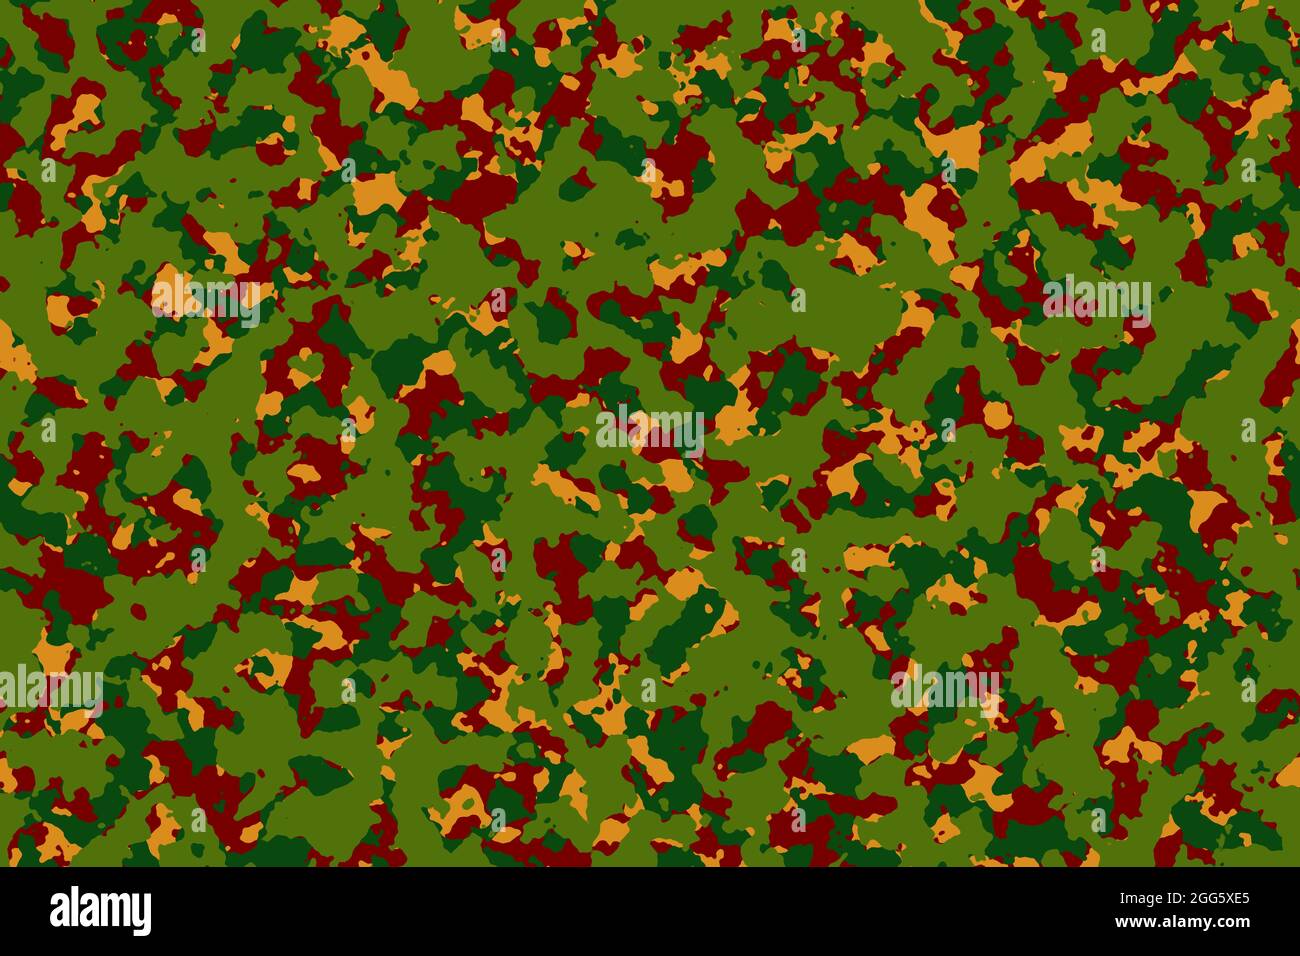 Military camouflage green, beige and red pattern Stock Photo